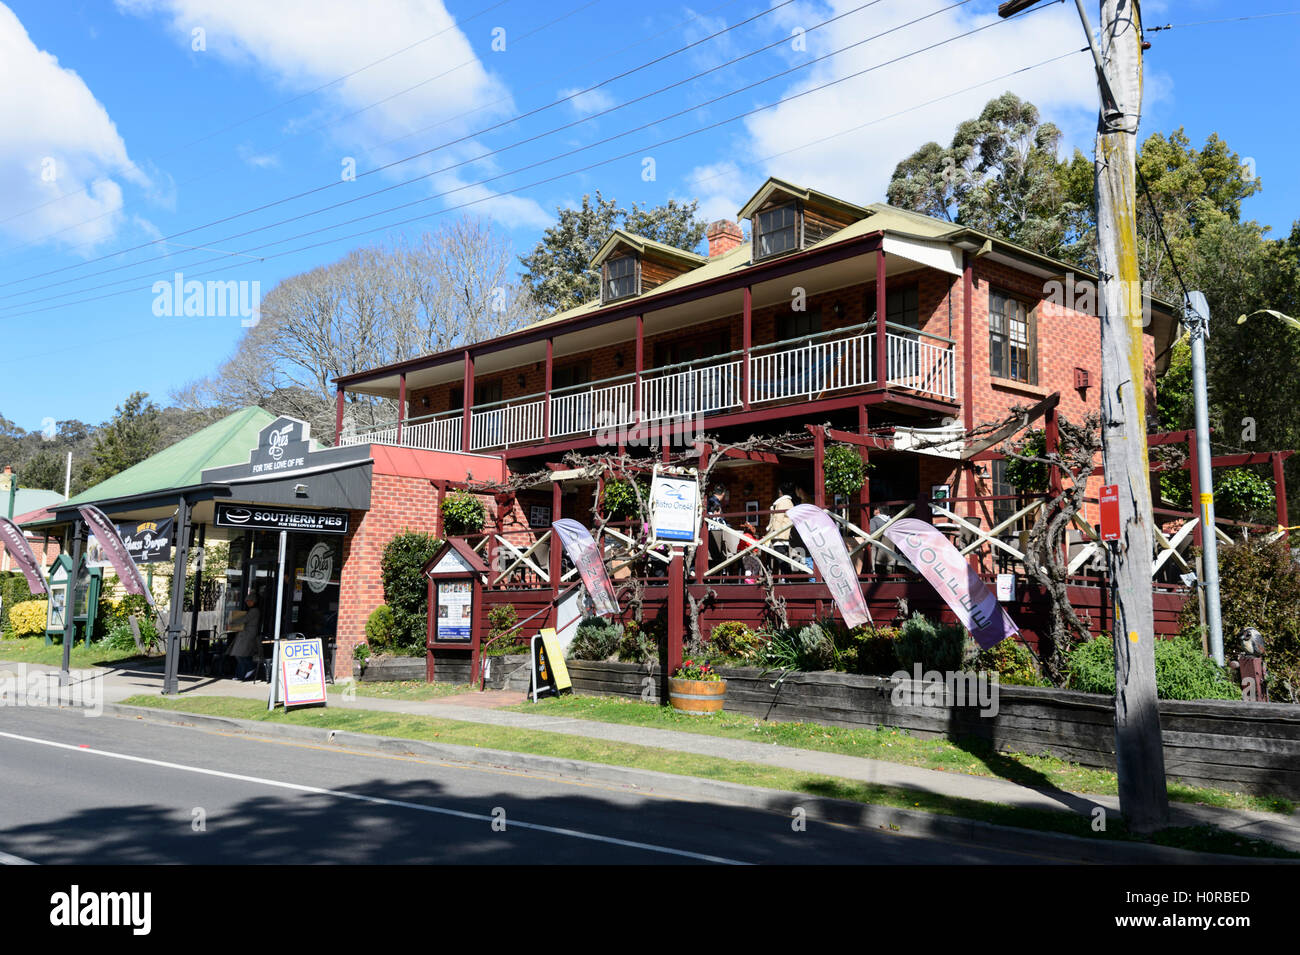 Un Bistro 46, Kangaroo Valley, New South Wales, NSW, Australie Banque D'Images